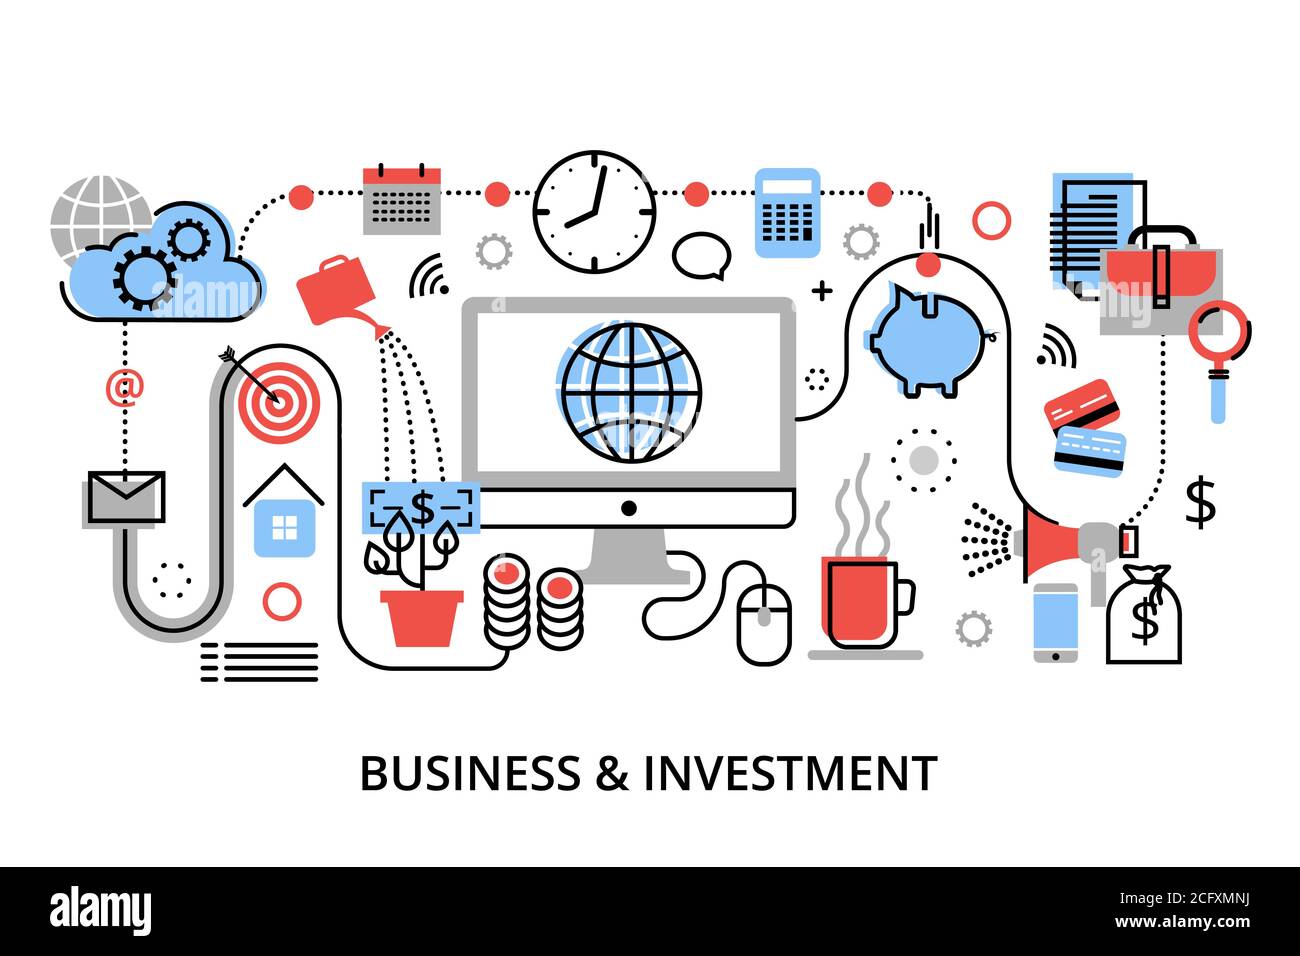 Modern flat thin line design vector illustration, infographic concept of investment process, stock market and internet business, for graphic and web d Stock Vector